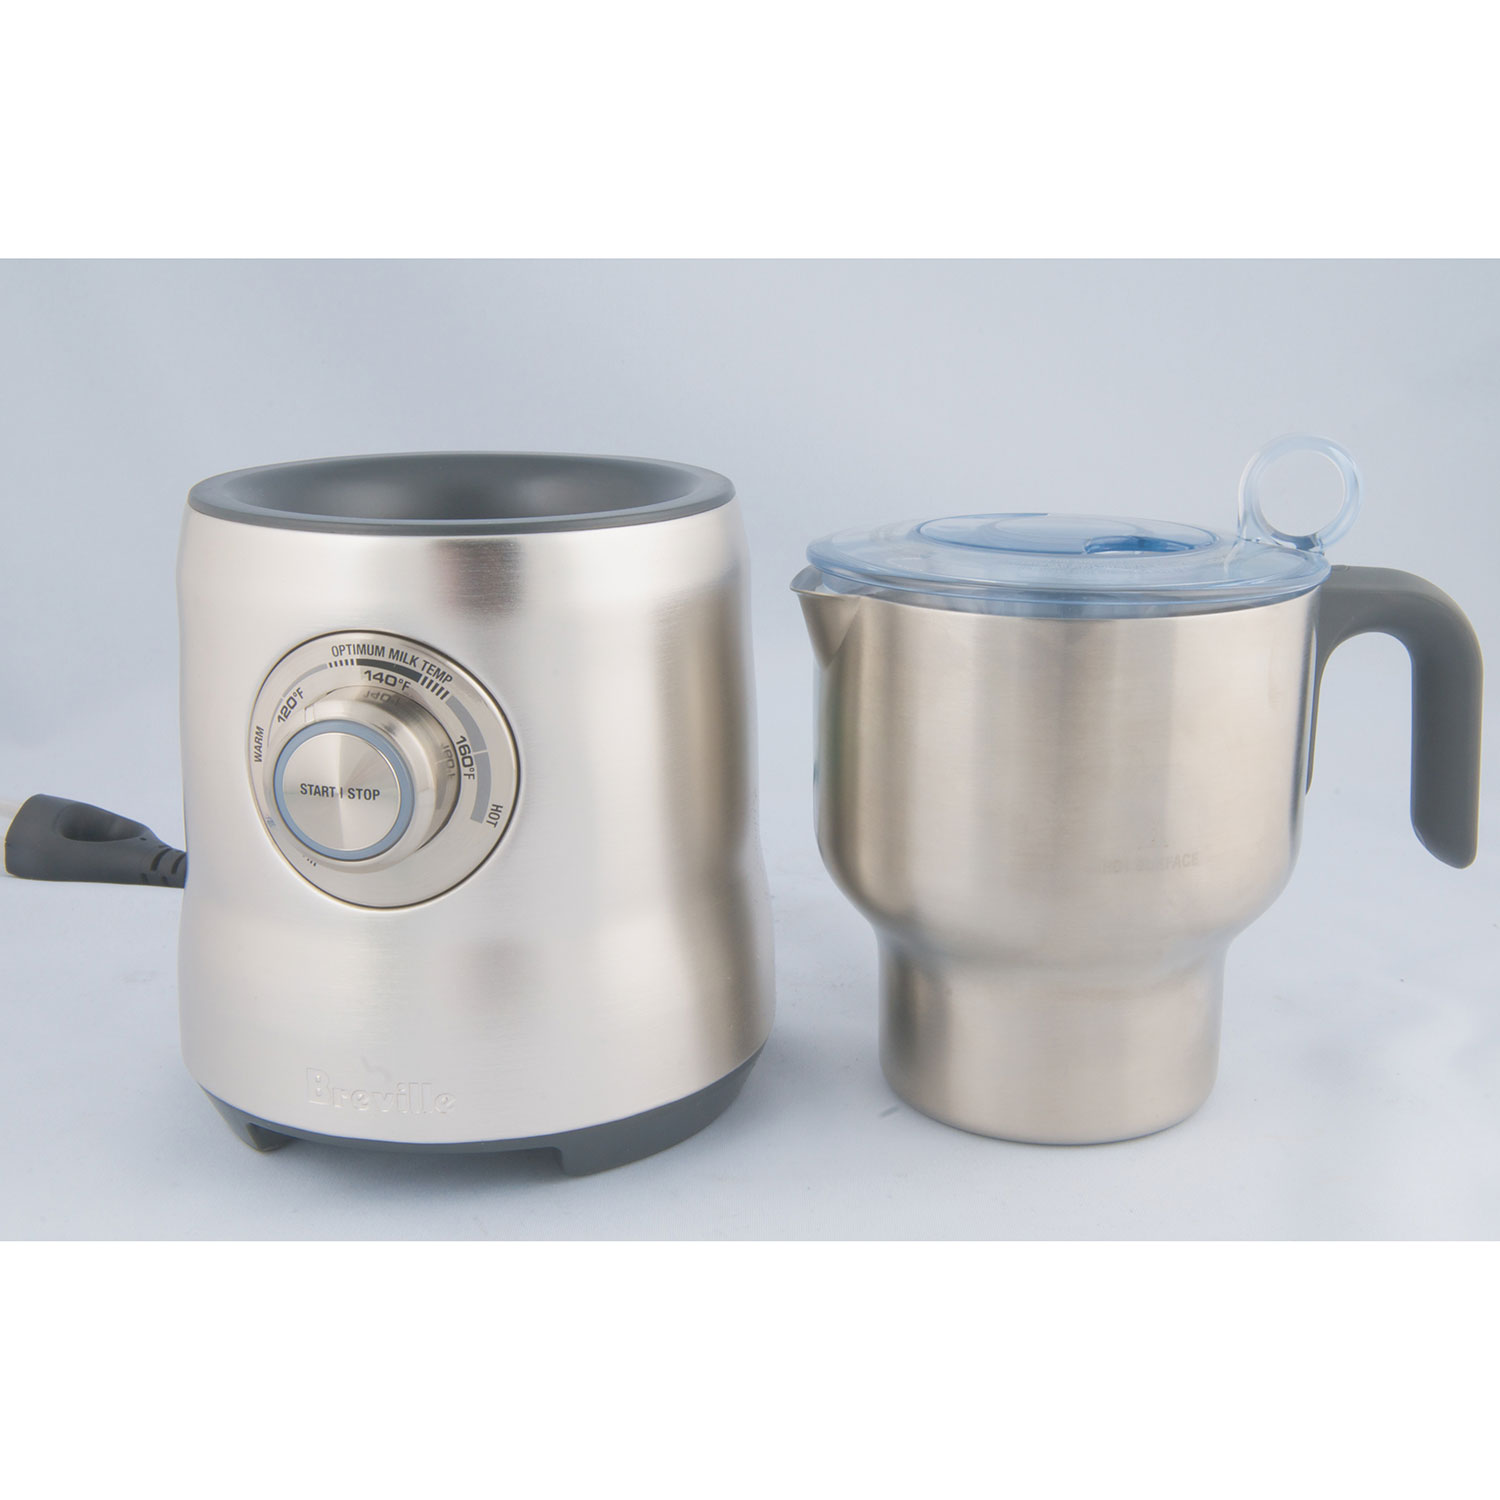 Breville the Milk Café Milk Frother Stainless Steel BMF600XL - Best Buy